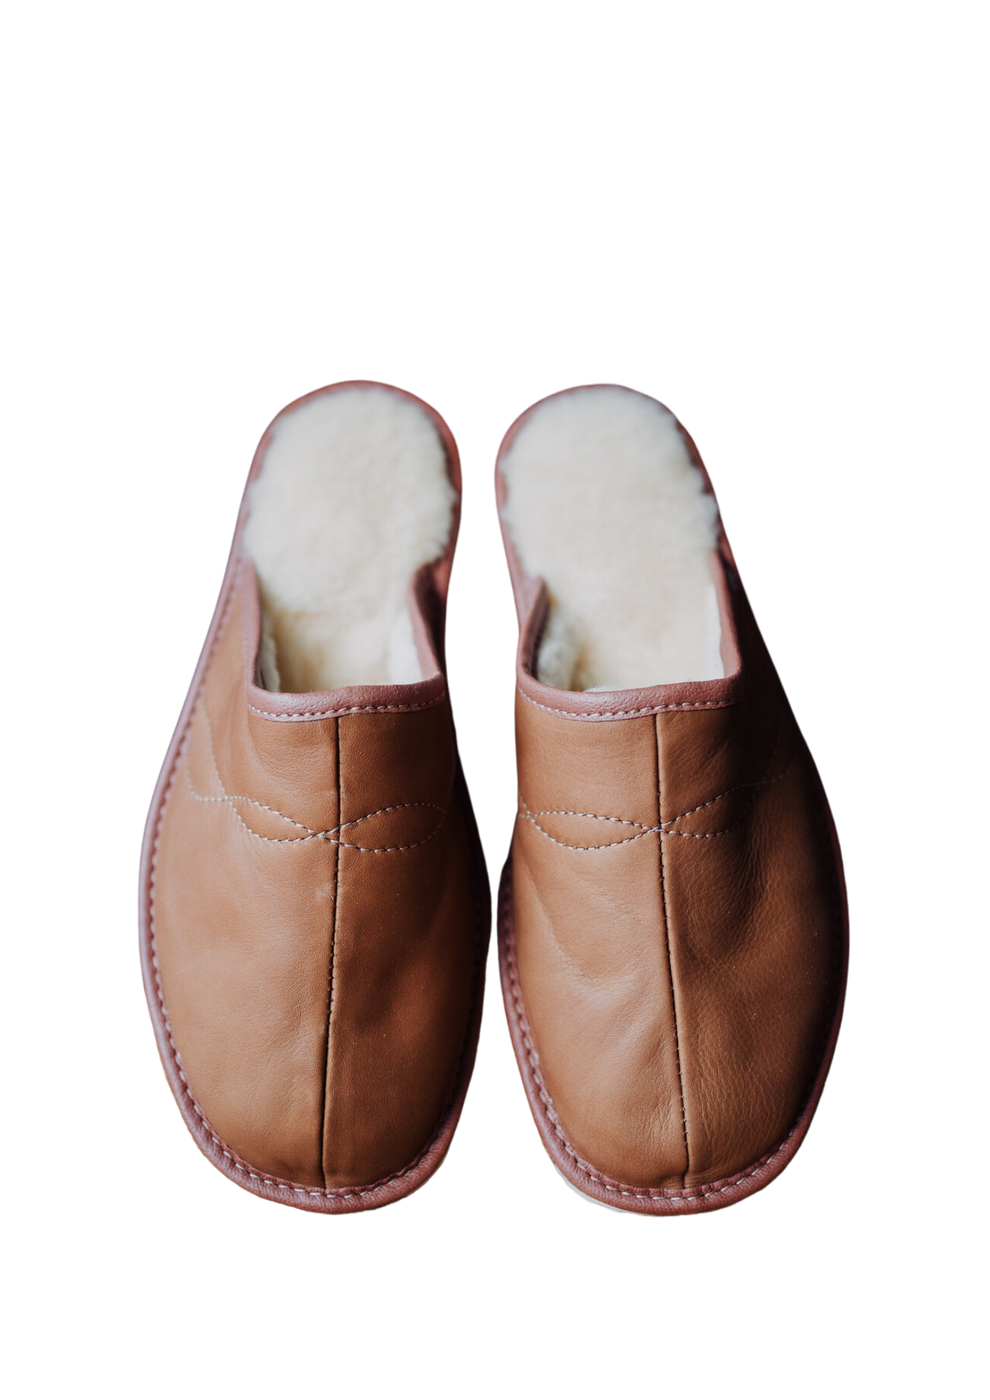 Leather slippers with sheepskin